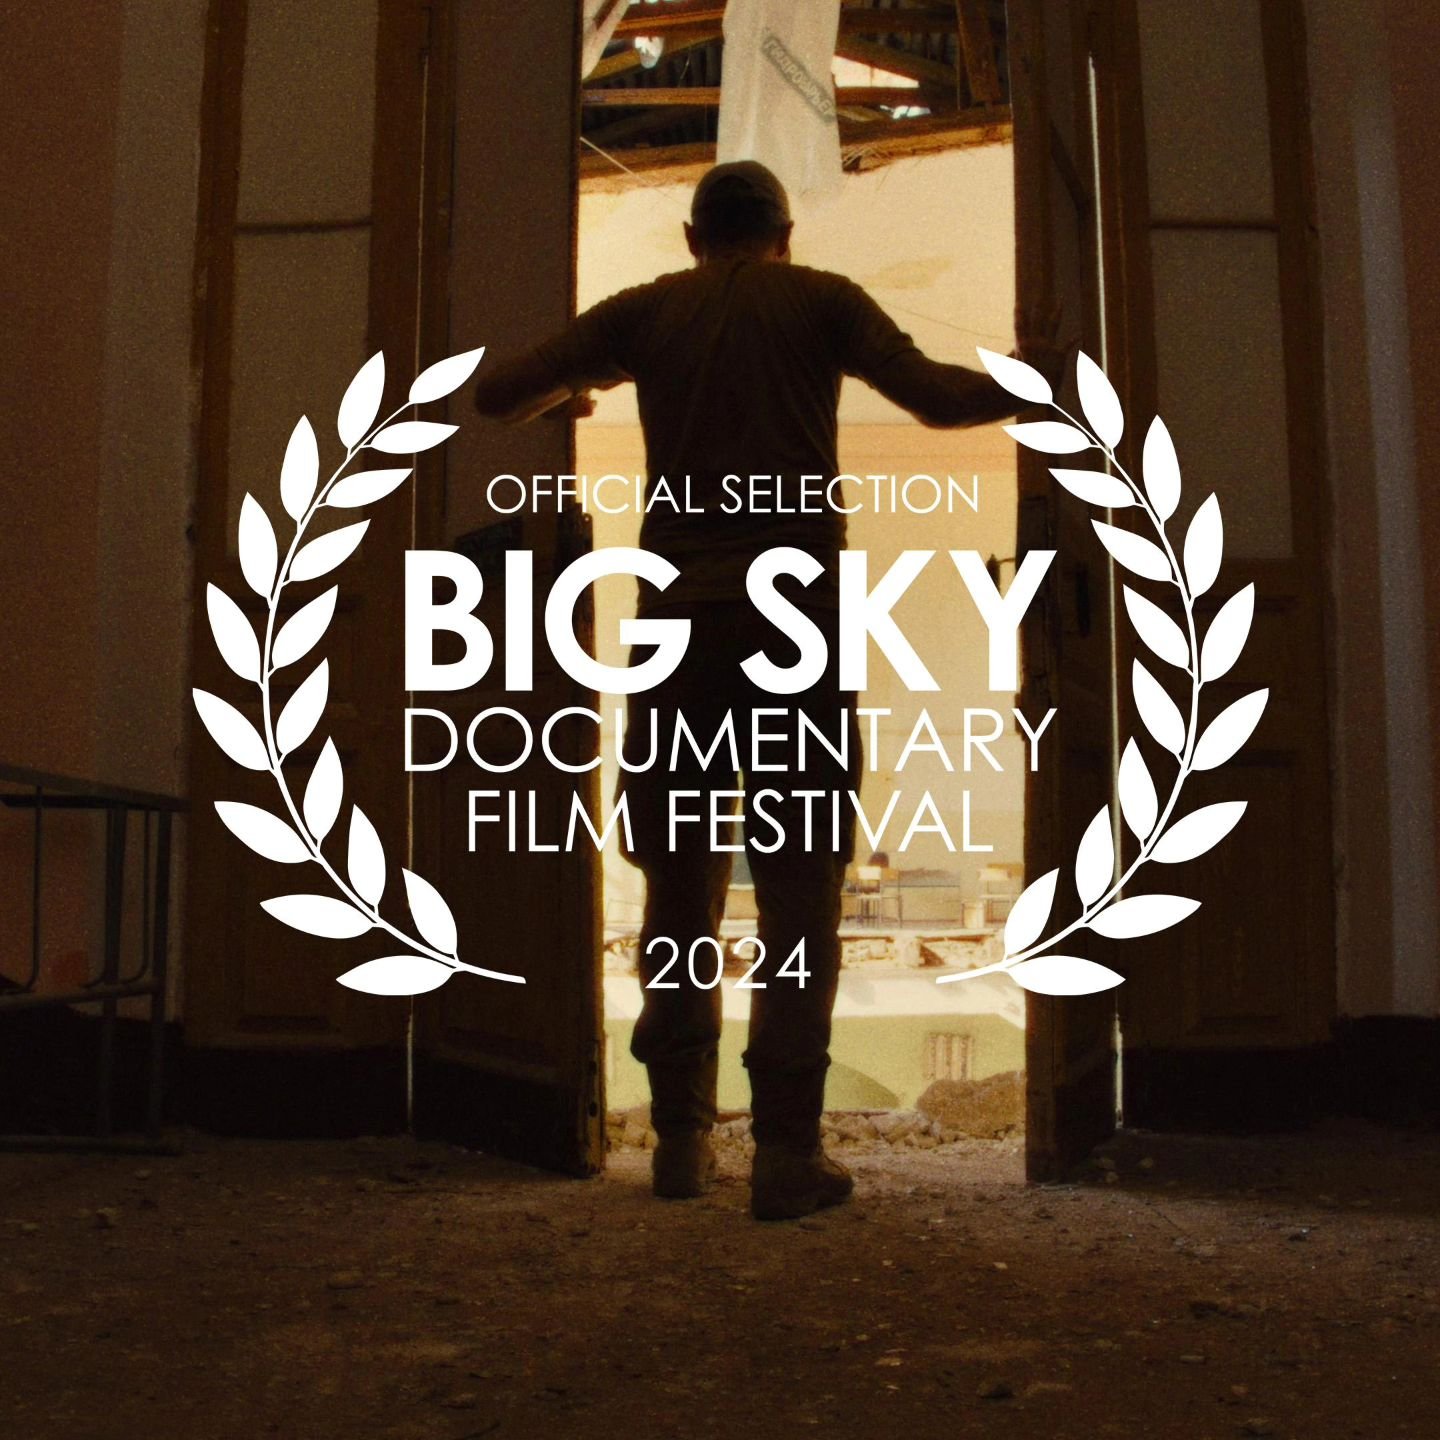 Thank you for having us Big Sky! Incredible reception for our Northwest Premiere in Montana!